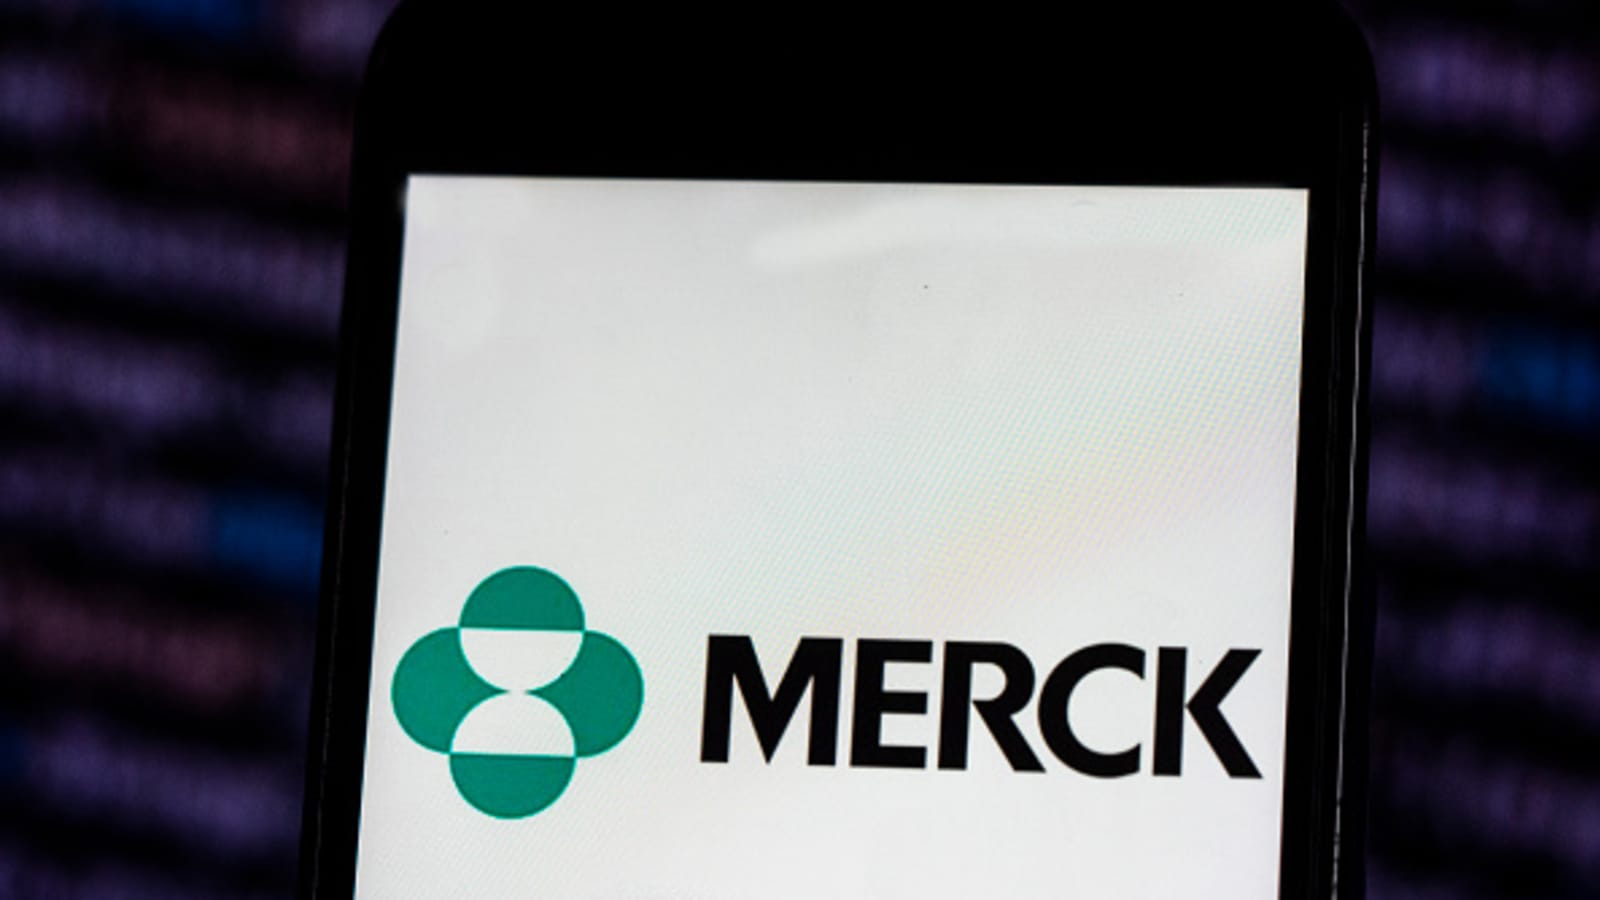 Merck Says It Plans To Spin Off Its Slow Growth Products Into A